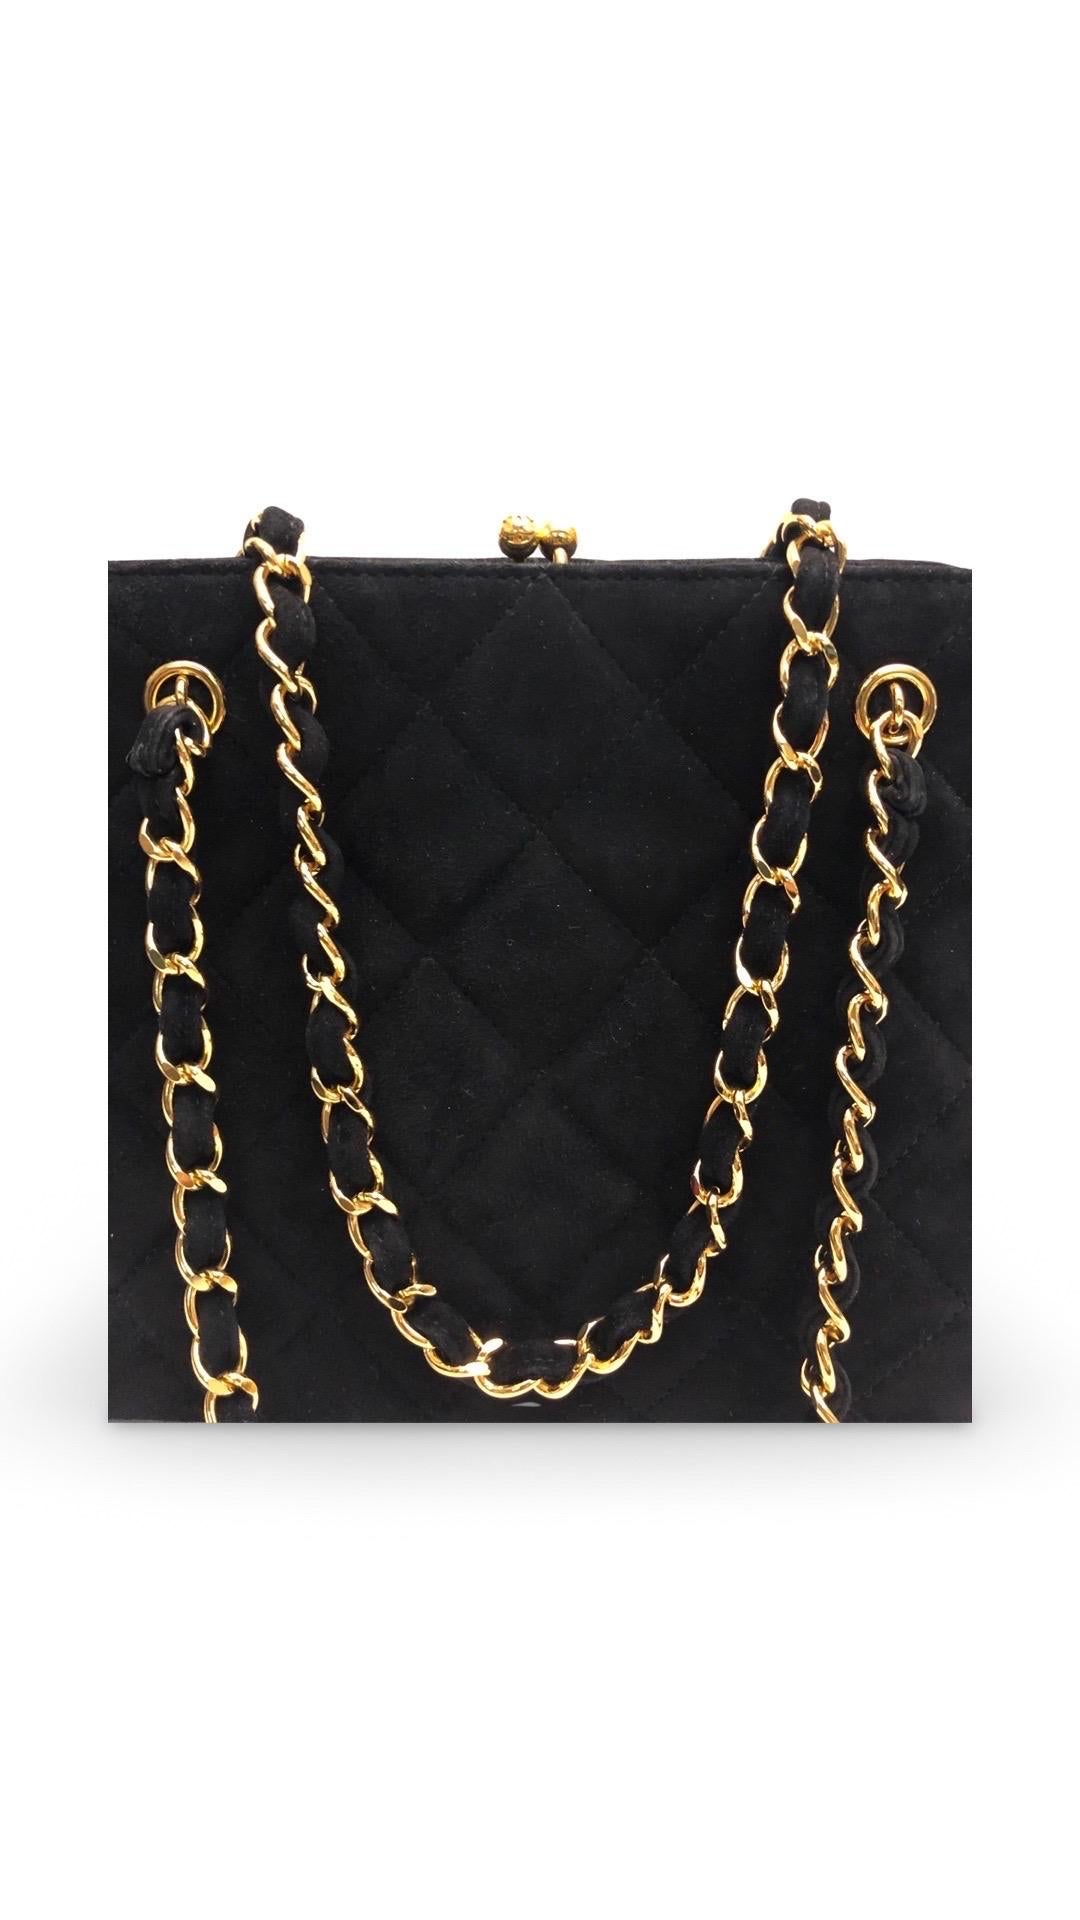 Chanel Black Suede Quilted Gold Toned Chain Box Handbag For Sale 1